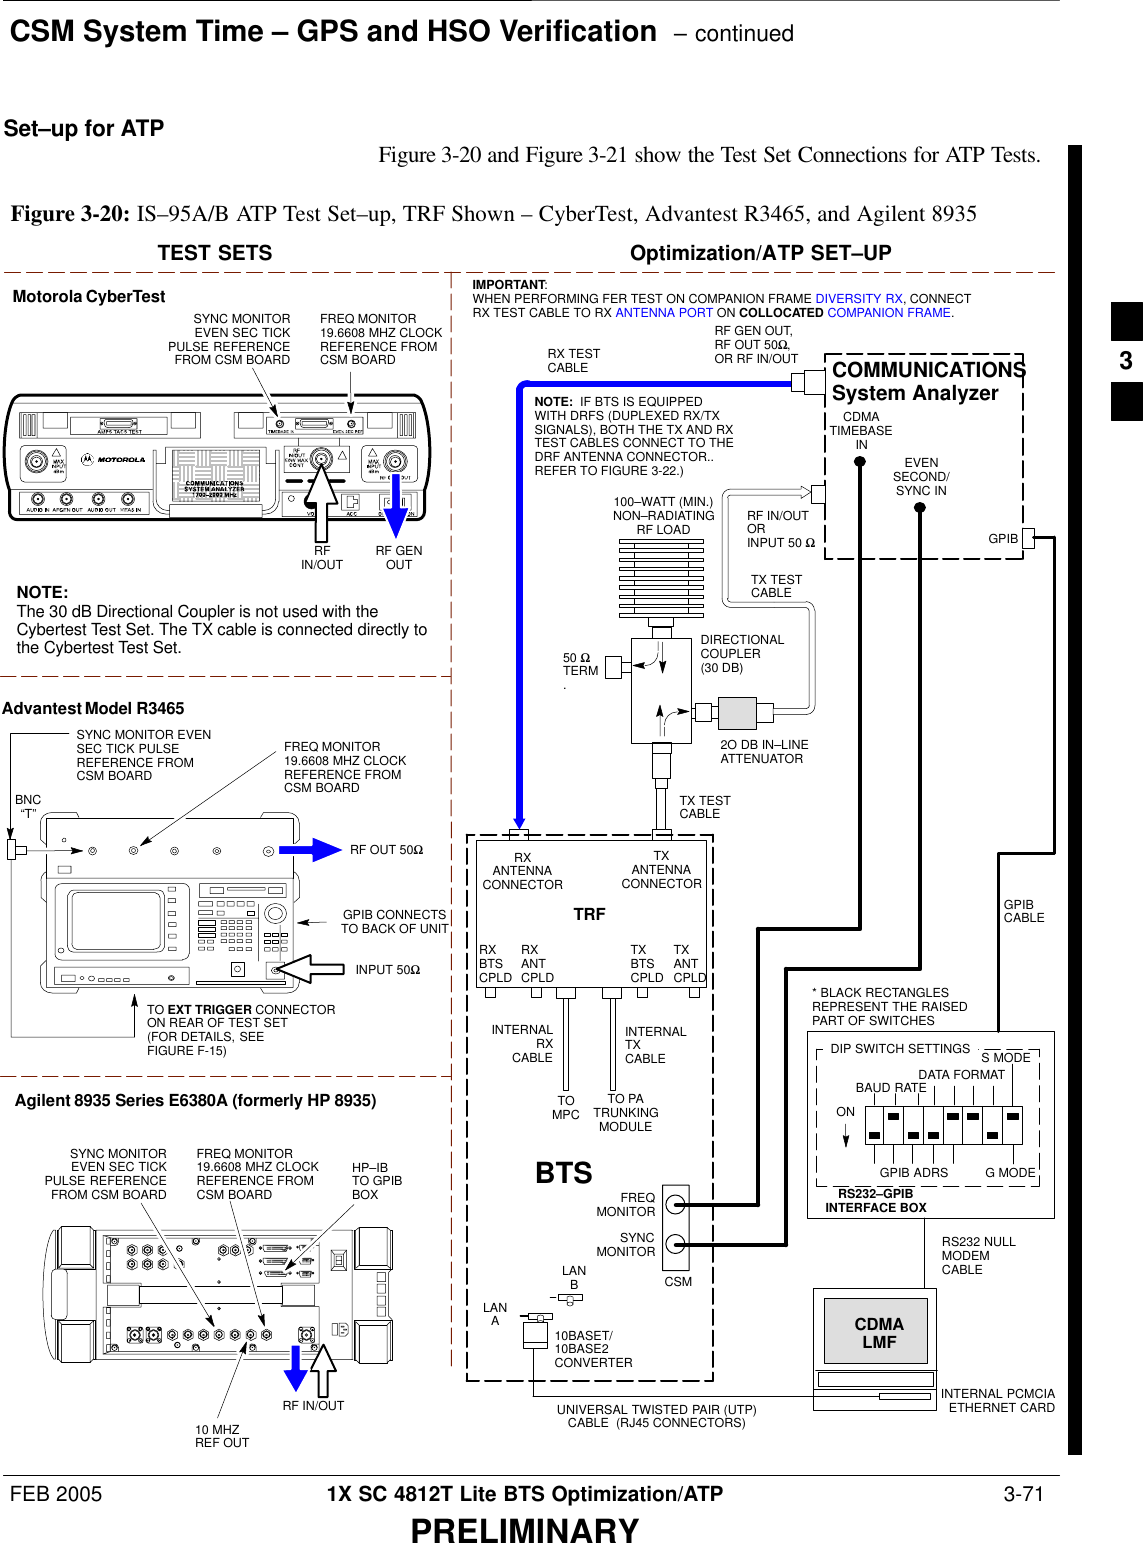 CSM System Time – GPS and HSO Verification  – continuedFEB 2005 1X SC 4812T Lite BTS Optimization/ATP  3-71PRELIMINARYSet–up for ATP Figure 3-20 and Figure 3-21 show the Test Set Connections for ATP Tests.Motorola CyberTestTEST SETS Optimization/ATP SET–UPRFIN/OUTSYNC MONITOREVEN SEC TICKPULSE REFERENCEFROM CSM BOARDFREQ MONITOR19.6608 MHZ CLOCKREFERENCE FROMCSM BOARDAdvantest Model R3465INPUT 50ΩGPIB CONNECTSTO BACK OF UNITNOTE: The 30 dB Directional Coupler is not used with theCybertest Test Set. The TX cable is connected directly tothe Cybertest Test Set.RF OUT 50ΩFREQ MONITOR19.6608 MHZ CLOCKREFERENCE FROMCSM BOARDRF GENOUTSYNC MONITOR EVENSEC TICK PULSEREFERENCE FROMCSM BOARDBNC“T”TO EXT TRIGGER CONNECTORON REAR OF TEST SET(FOR DETAILS, SEEFIGURE F-15)TOMPCTO PATRUNKINGMODULERS232–GPIBINTERFACE BOXINTERNAL PCMCIAETHERNET CARDGPIBCABLEUNIVERSAL TWISTED PAIR (UTP)CABLE  (RJ45 CONNECTORS)RS232 NULLMODEMCABLES MODEDATA FORMATBAUD RATEGPIB ADRS G MODEONBTSINTERNALTXCABLECDMALMFDIP SWITCH SETTINGS10BASET/10BASE2CONVERTERLANBLANARX TESTCABLEGPIBRF IN/OUTORINPUT 50 ΩRF GEN OUT,RF OUT 50Ω,OR RF IN/OUTRXANTENNACONNECTORFREQMONITORSYNCMONITORCSMINTERNALRXCABLETXANTCPLDRXBTSCPLDTRFTXBTSCPLDRXANTCPLDTXANTENNACONNECTORCOMMUNICATIONSSystem Analyzer50 ΩTERM.TX TESTCABLEDIRECTIONALCOUPLER(30 DB)100–WATT (MIN.)NON–RADIATINGRF LOADTX TESTCABLE* BLACK RECTANGLESREPRESENT THE RAISEDPART OF SWITCHESCDMATIMEBASEINEVENSECOND/SYNC INNOTE:  IF BTS IS EQUIPPEDWITH DRFS (DUPLEXED RX/TXSIGNALS), BOTH THE TX AND RXTEST CABLES CONNECT TO THEDRF ANTENNA CONNECTOR..REFER TO FIGURE 3-22.)2O DB IN–LINEATTENUATORIMPORTANT:WHEN PERFORMING FER TEST ON COMPANION FRAME DIVERSITY RX, CONNECTRX TEST CABLE TO RX ANTENNA PORT ON COLLOCATED COMPANION FRAME.Agilent 8935 Series E6380A (formerly HP 8935)RF IN/OUTHP–IBTO GPIBBOXSYNC MONITOREVEN SEC TICKPULSE REFERENCEFROM CSM BOARDFREQ MONITOR19.6608 MHZ CLOCKREFERENCE FROMCSM BOARD10 MHZREF OUTFigure 3-20: IS–95A/B ATP Test Set–up, TRF Shown – CyberTest, Advantest R3465, and Agilent 89353